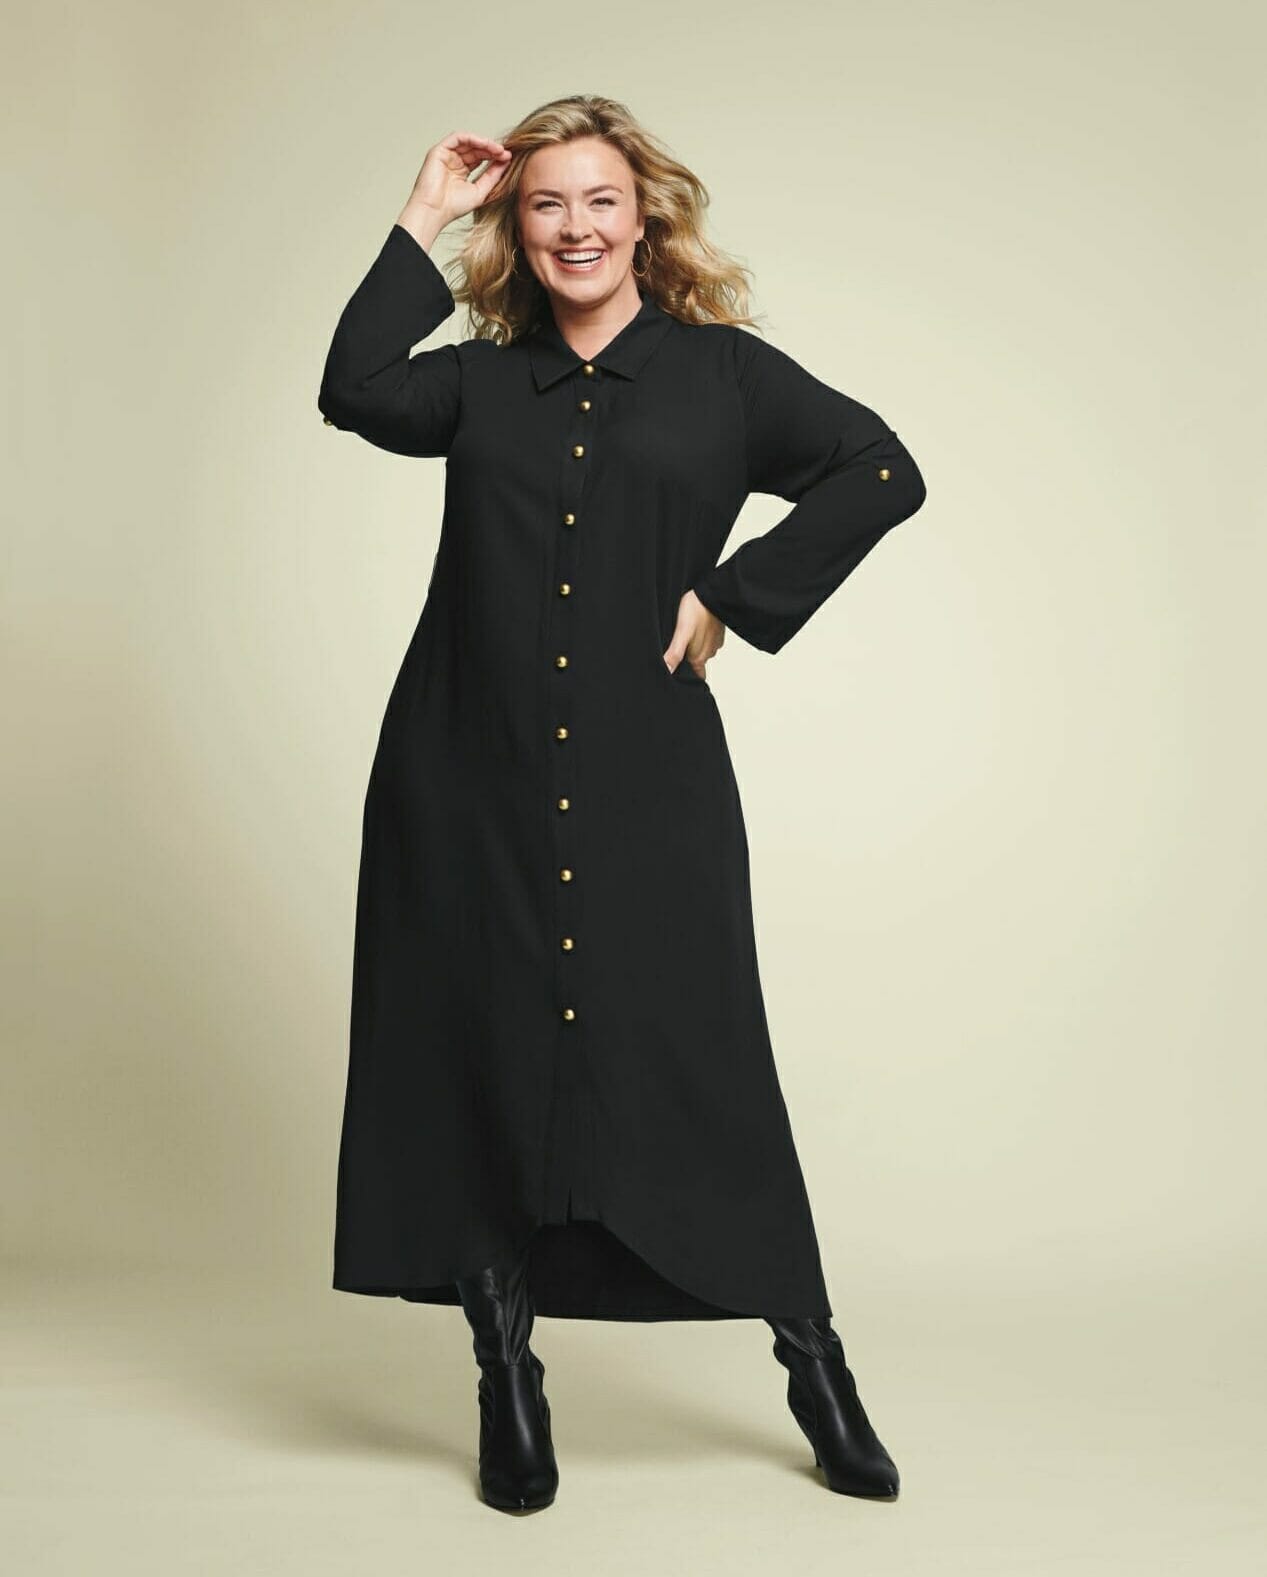 plus size model wearing black long sleeve dress with boots